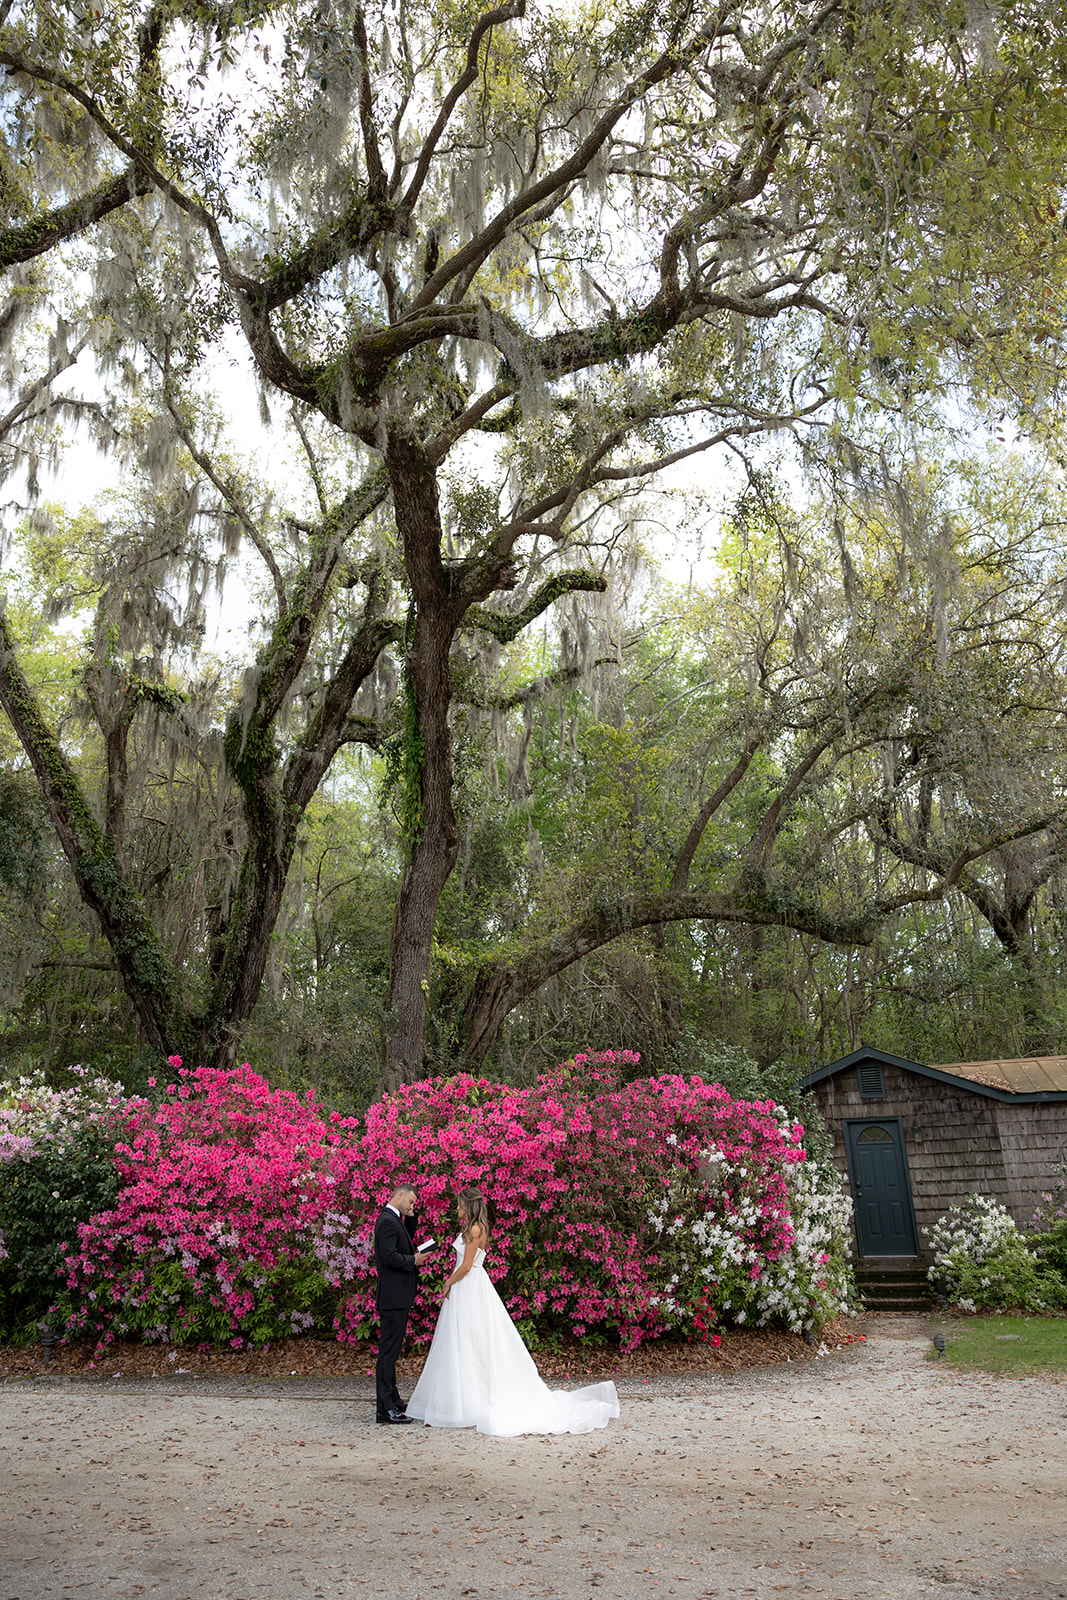 First look of bride and groom at Magnolia Plantation Wedding. Red azaleas blooming in the background and hugh oak trees.